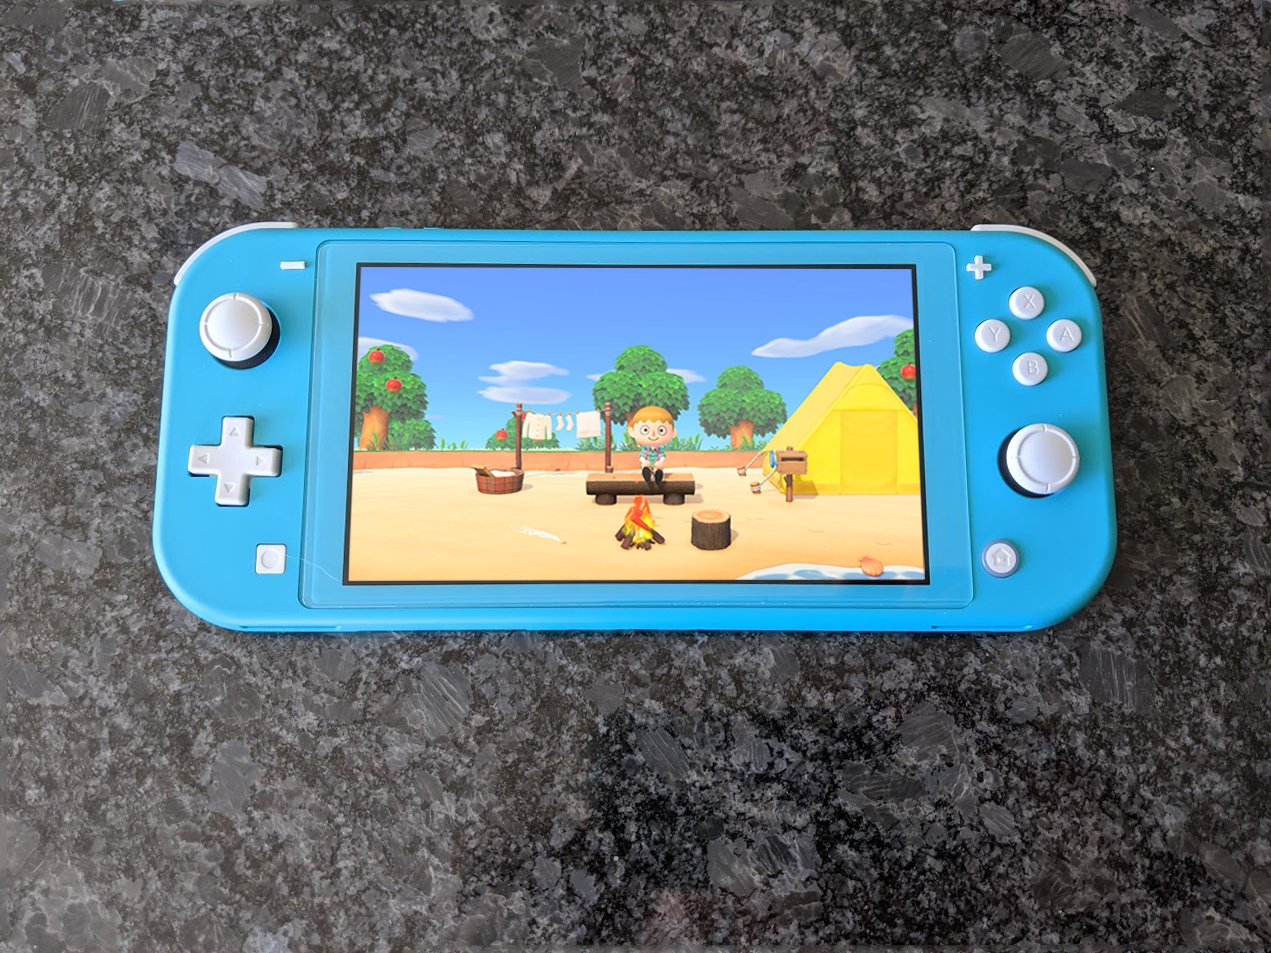 Can You Play Animal Crossing On A Nintendo Switch Lite?